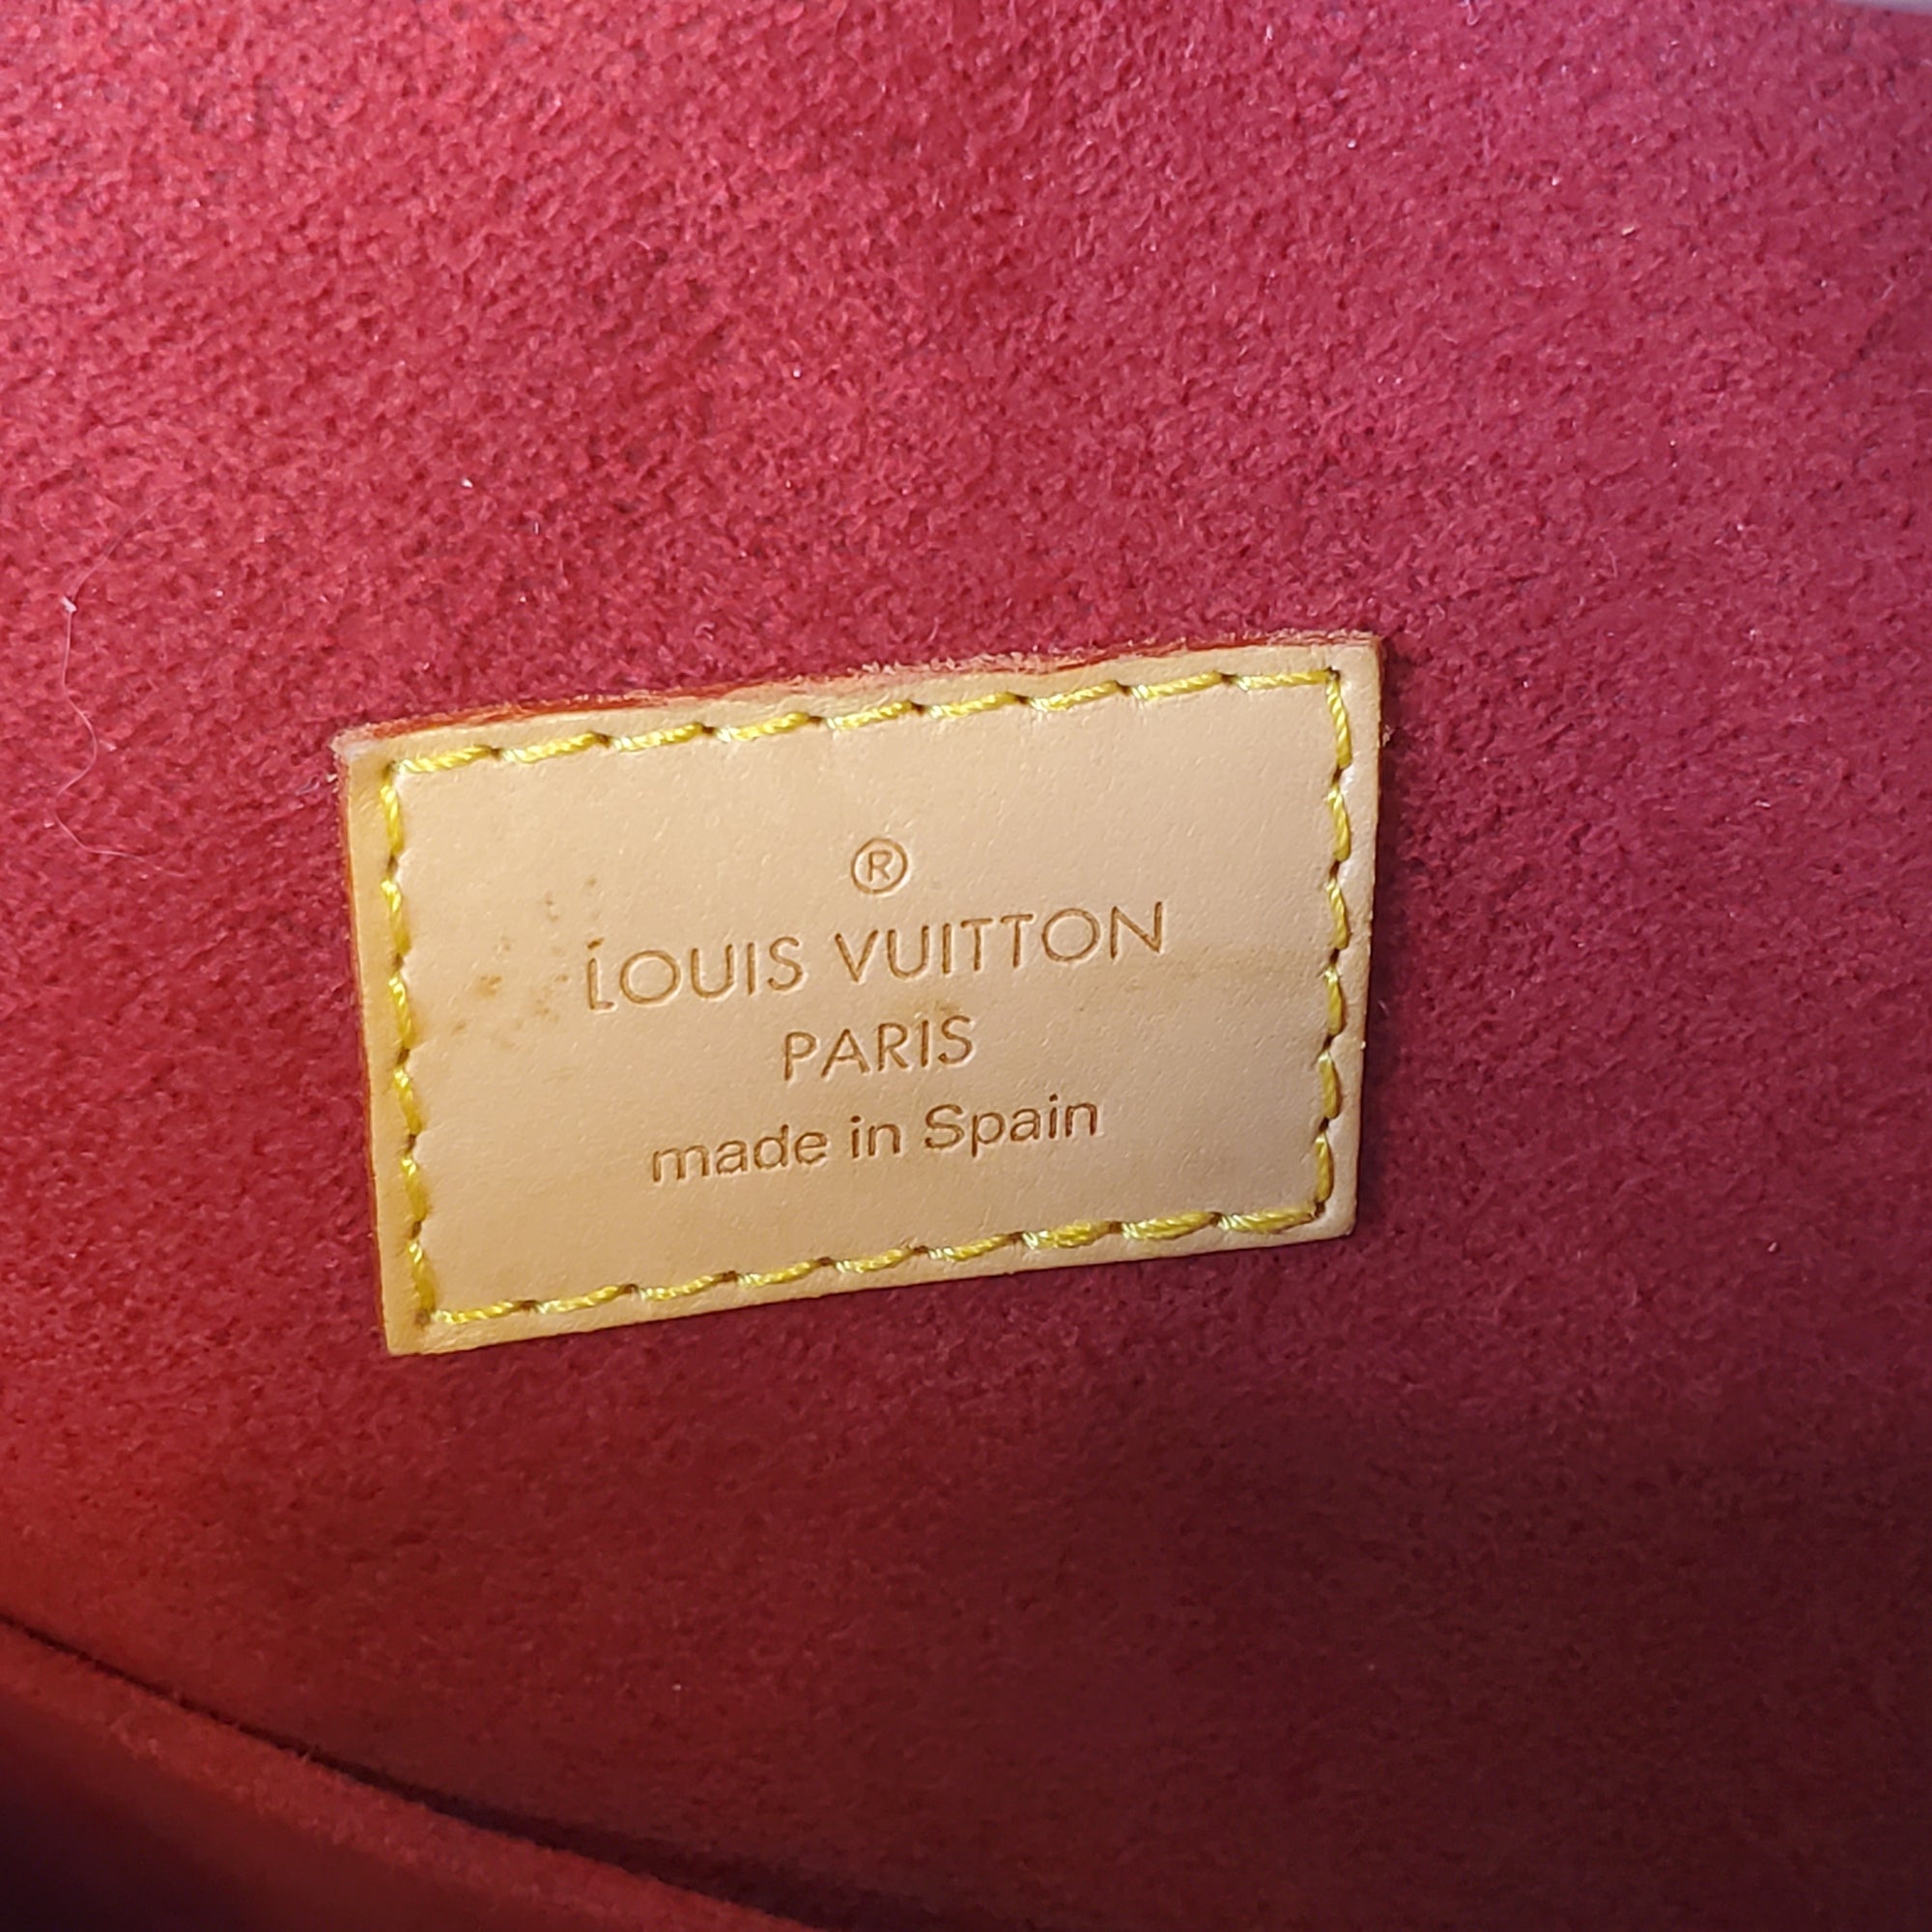 Fast & Professional Translation Service - Louis Vuitton Backpack